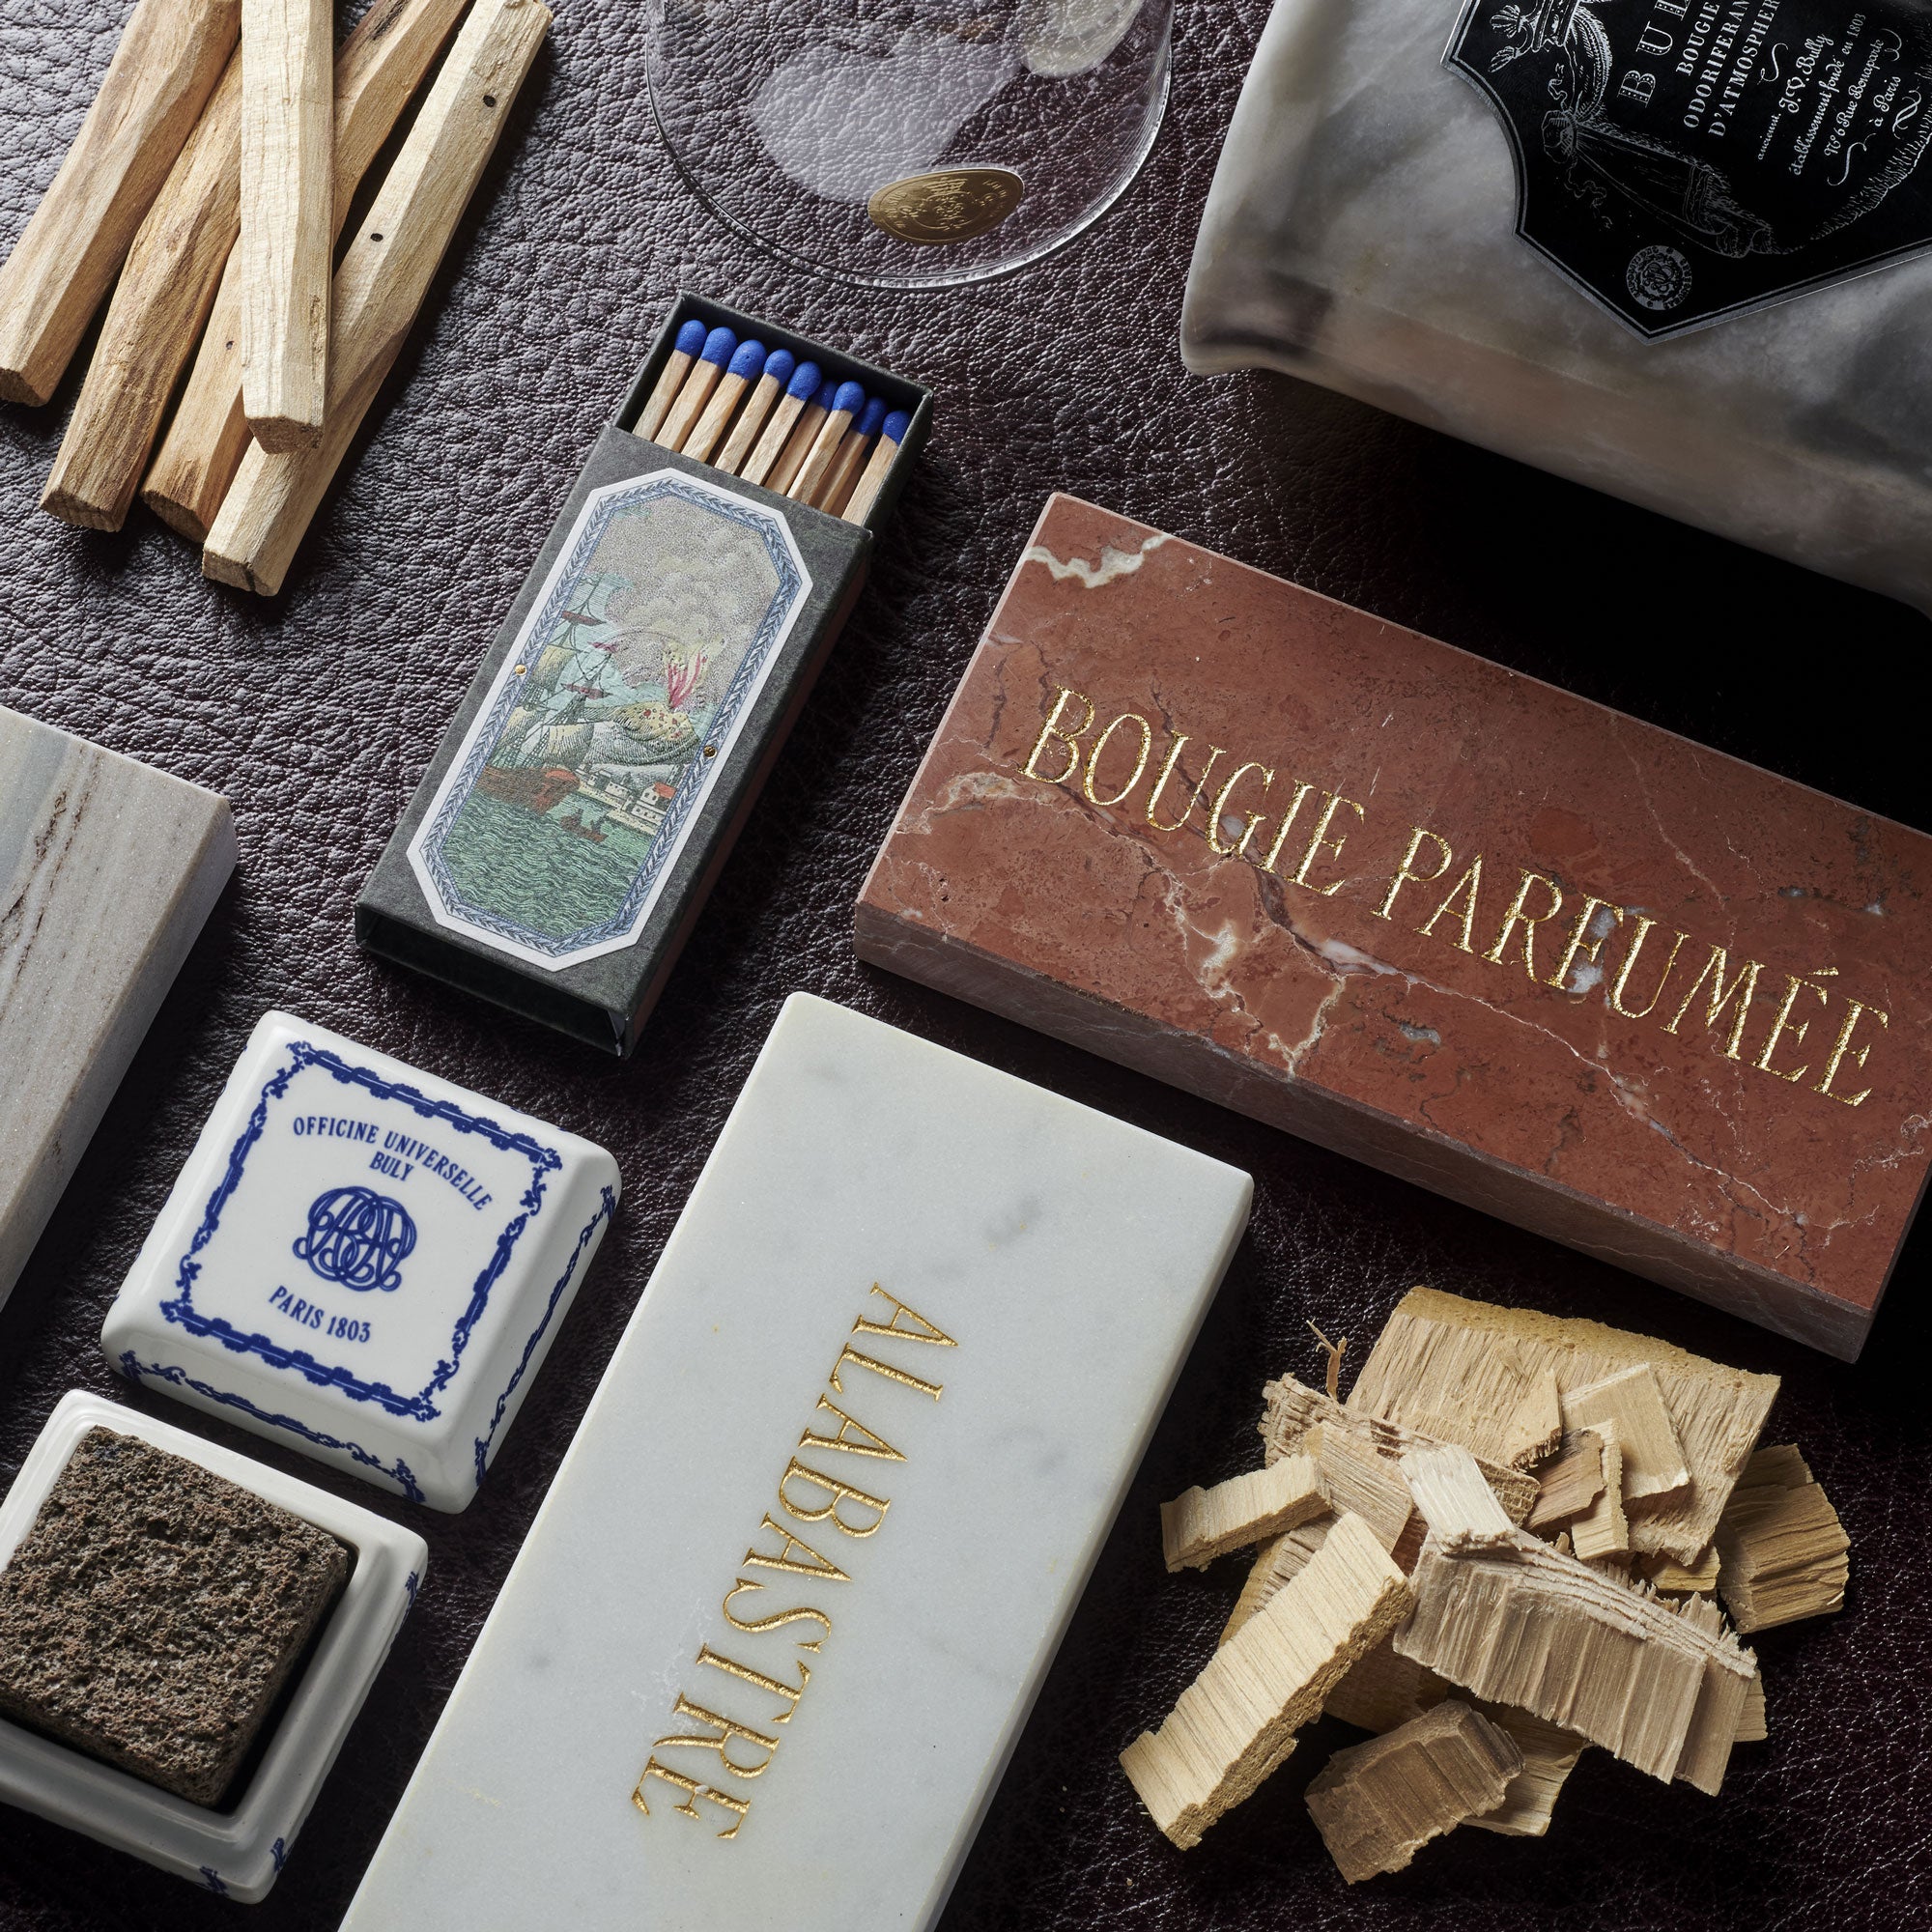 SCENTED MATCHES – Officine Universelle Buly